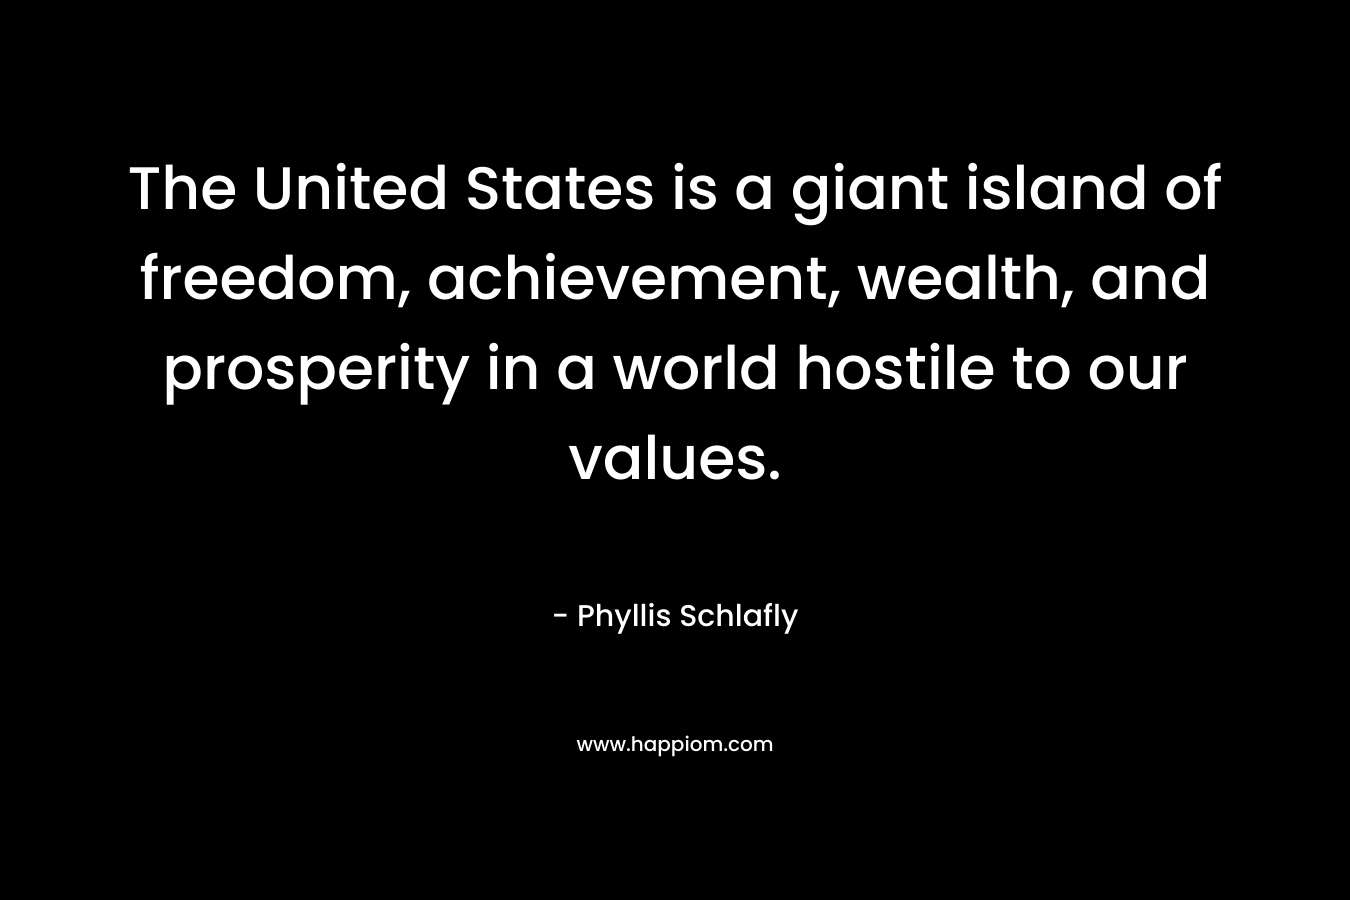 The United States is a giant island of freedom, achievement, wealth, and prosperity in a world hostile to our values. – Phyllis Schlafly